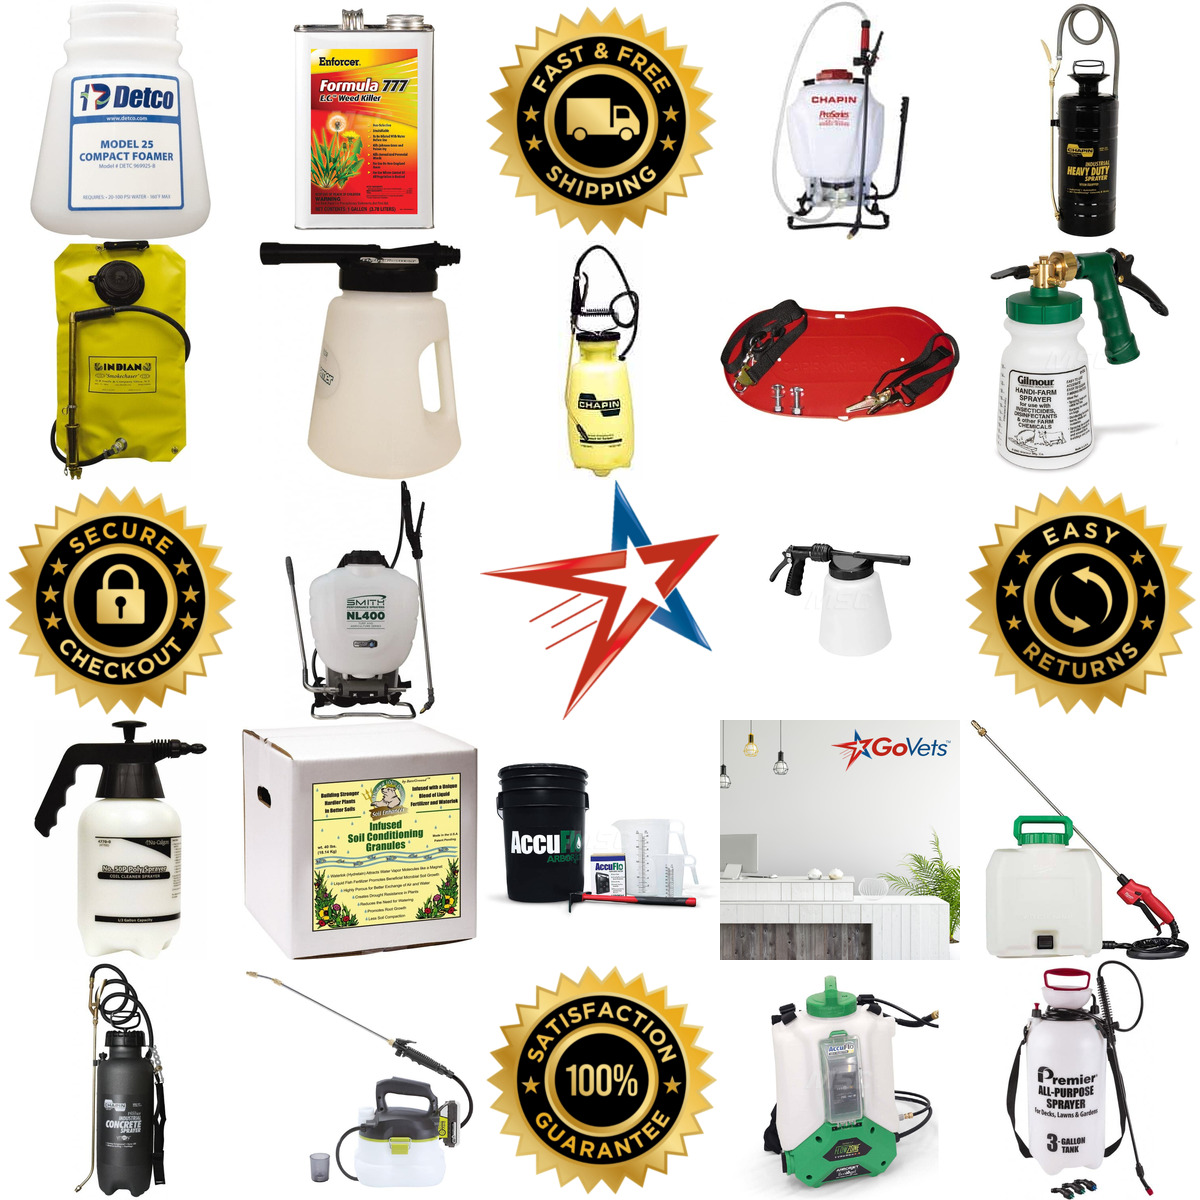 A selection of Garden and Pump Sprayers and Accessories products on GoVets